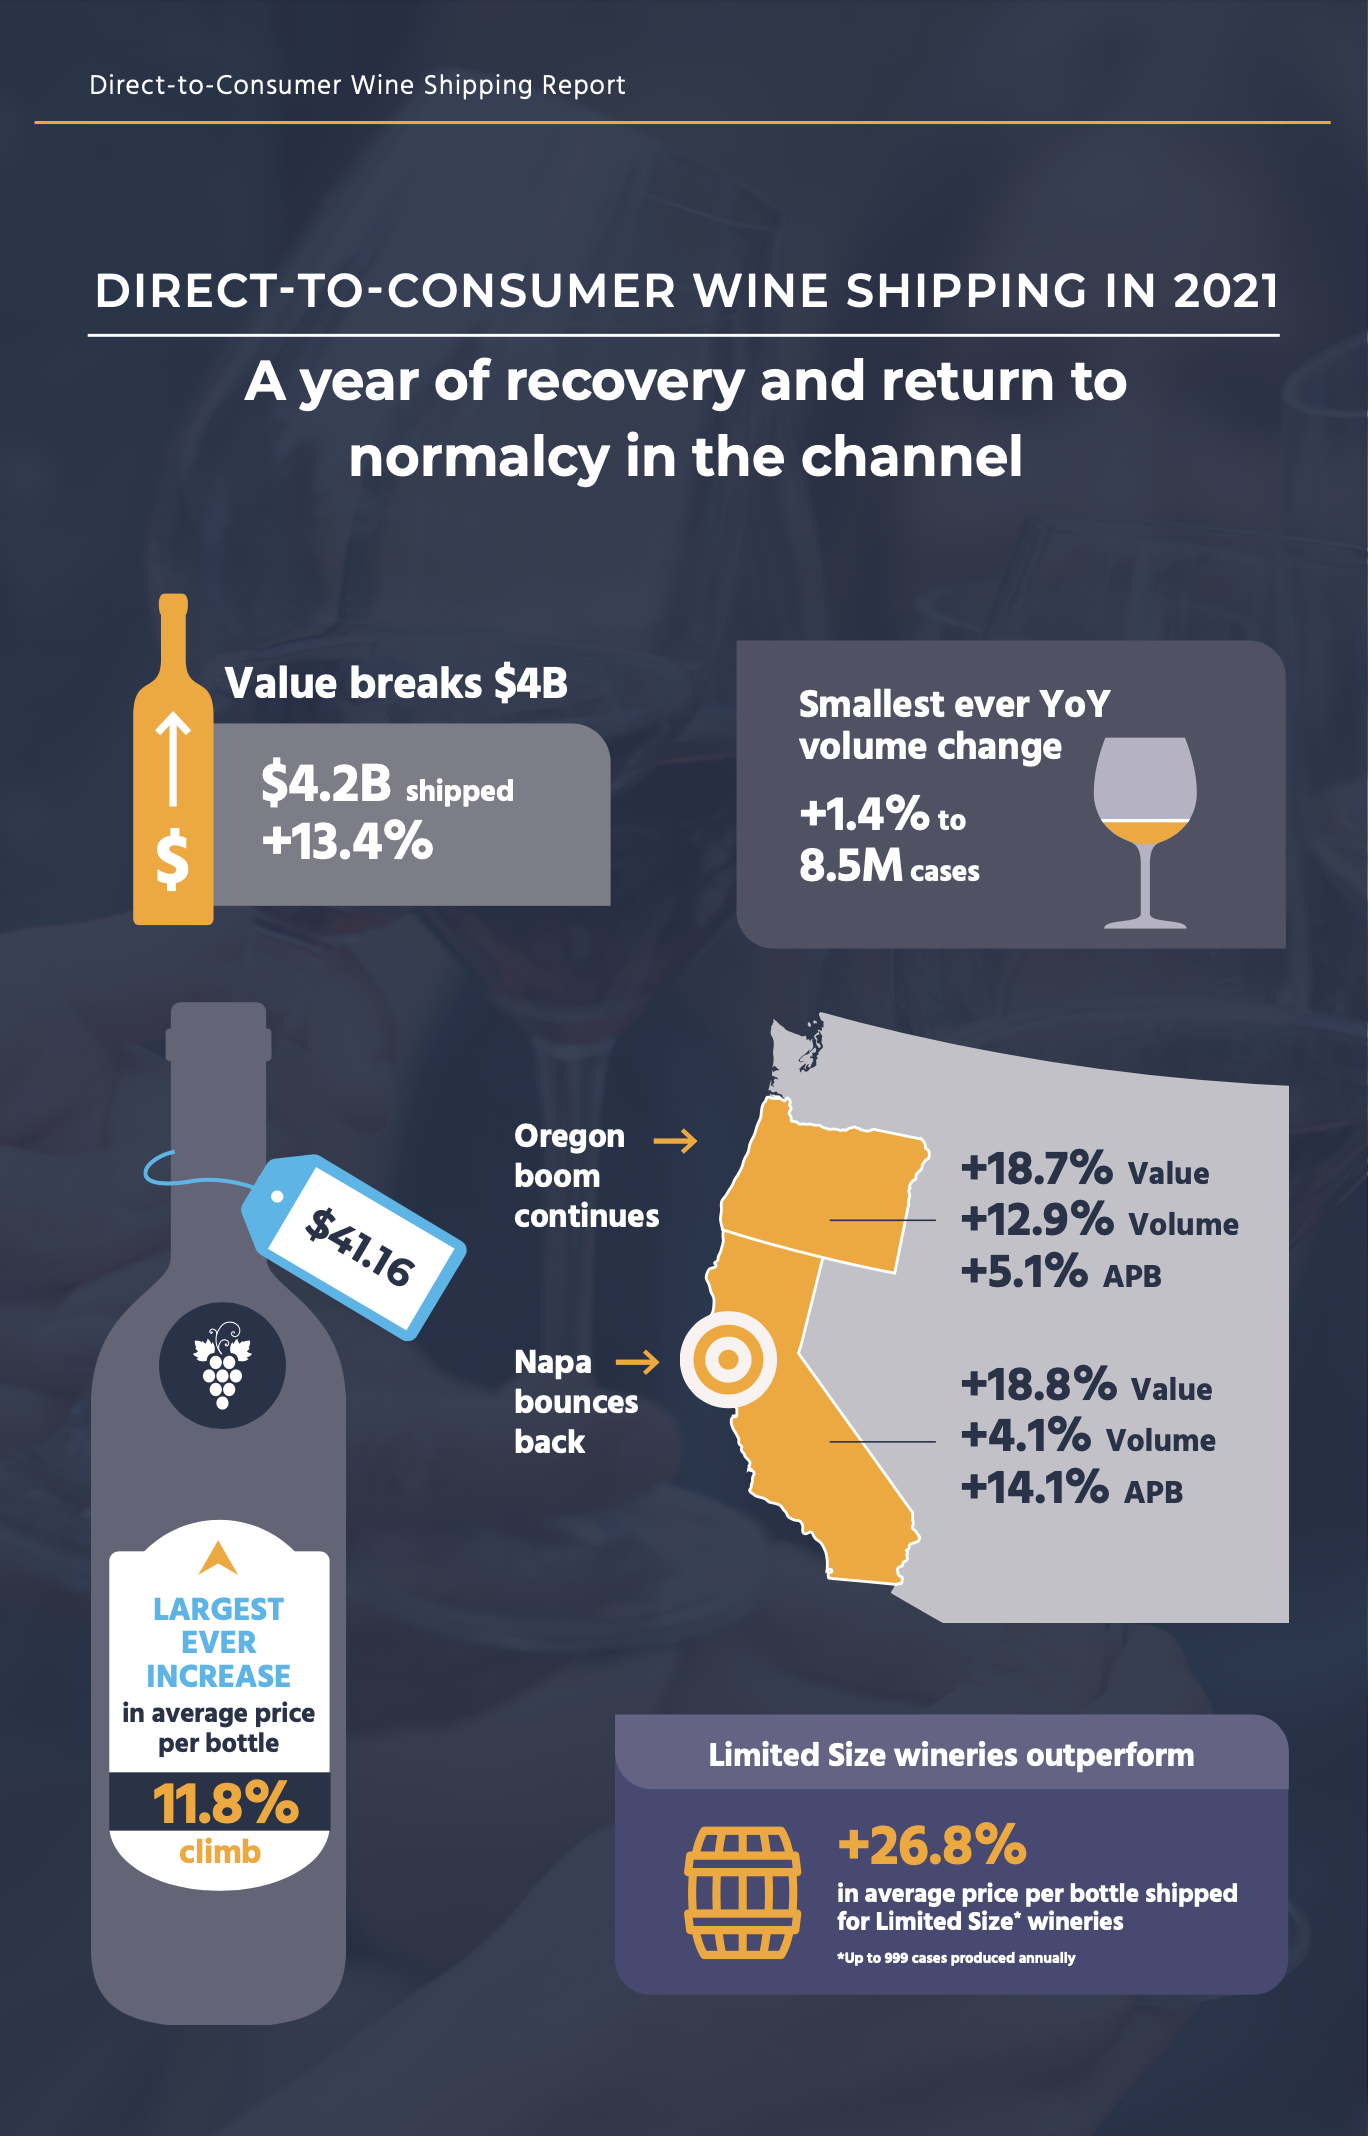 2022 Direct to Consumer Wine Shipping Report at-a-glance